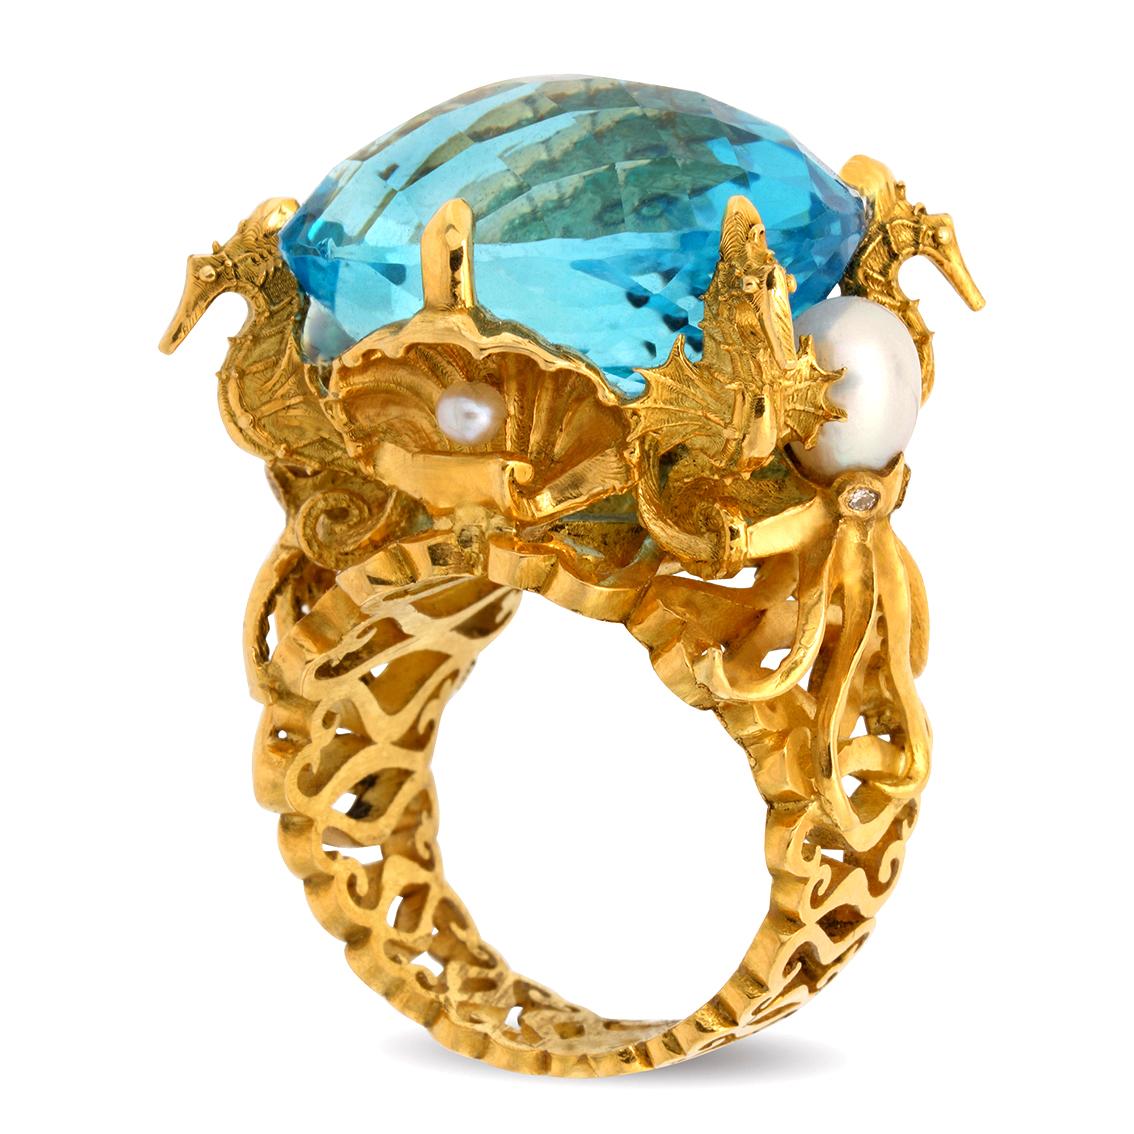 Handcrafted in 18kt yellow gold this captivating ring features a spectacular 35.3ct, 22mm x 17mm x 14mm Swiss blue oval checkerboard cut topaz buoyed upon golden seashells and flanked by four sentinel seahorses and two octopi. It features four